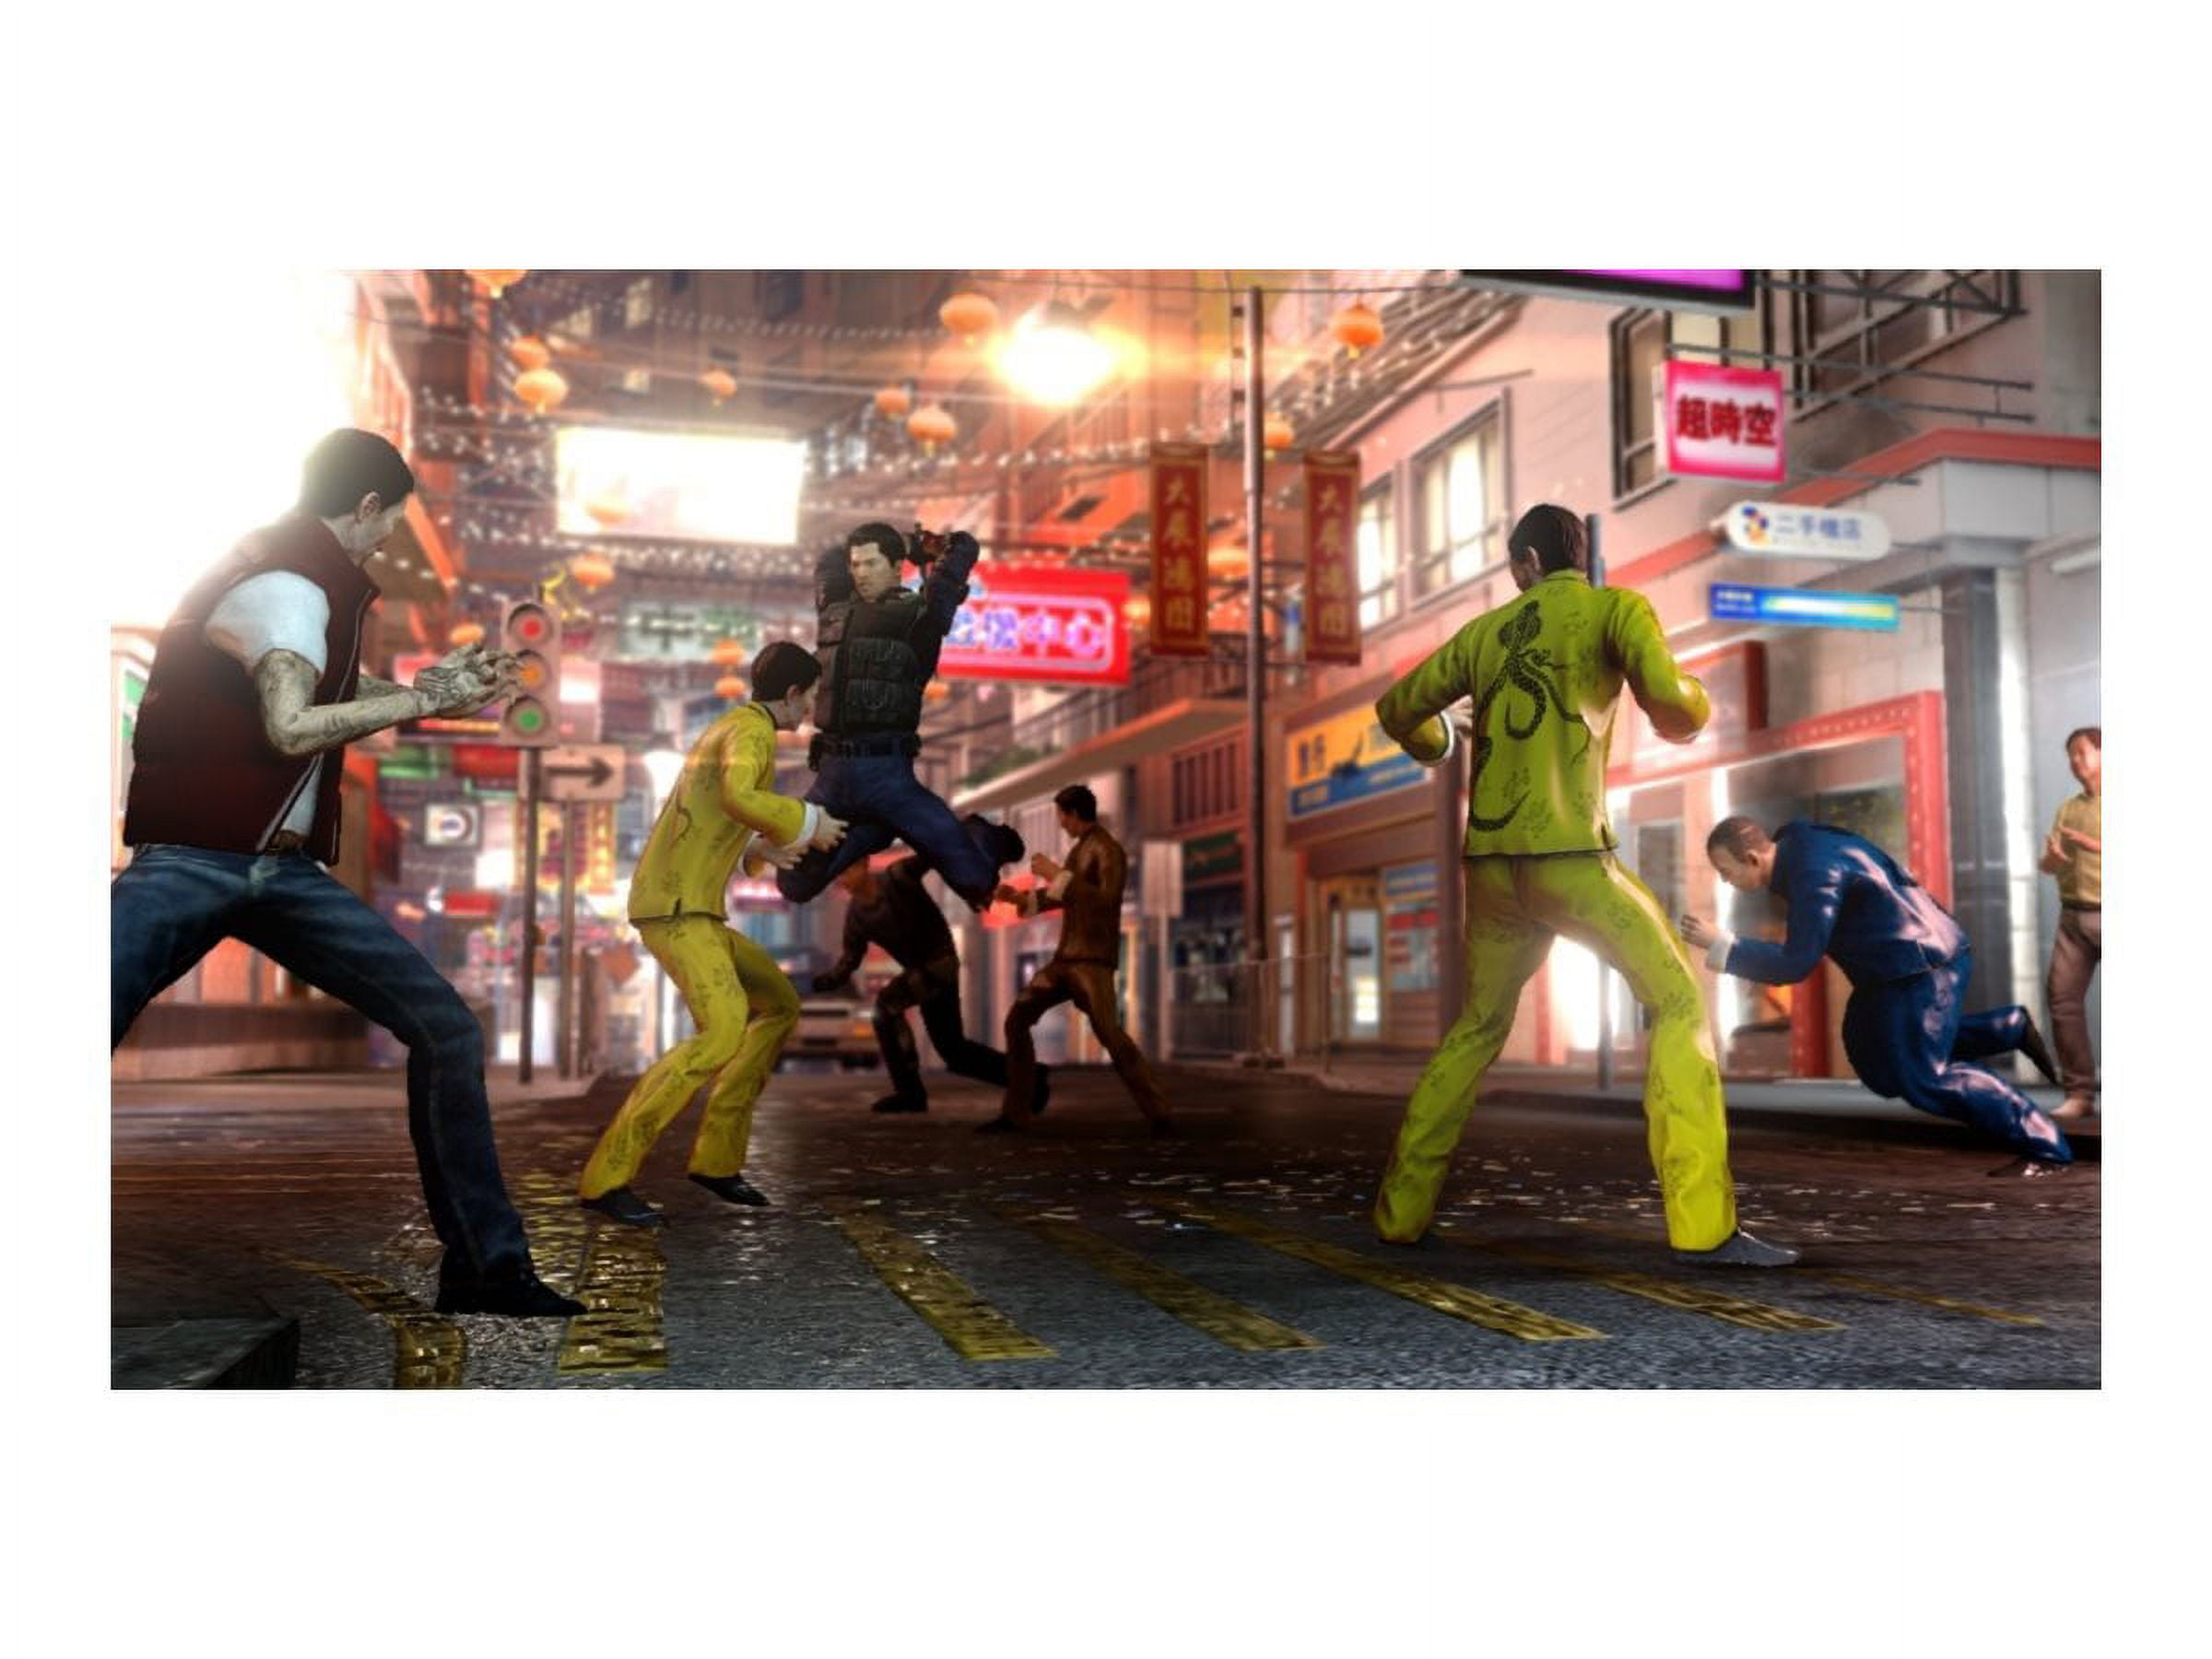 Sleeping Dogs Definitive Edition (PS4) Square Enix 